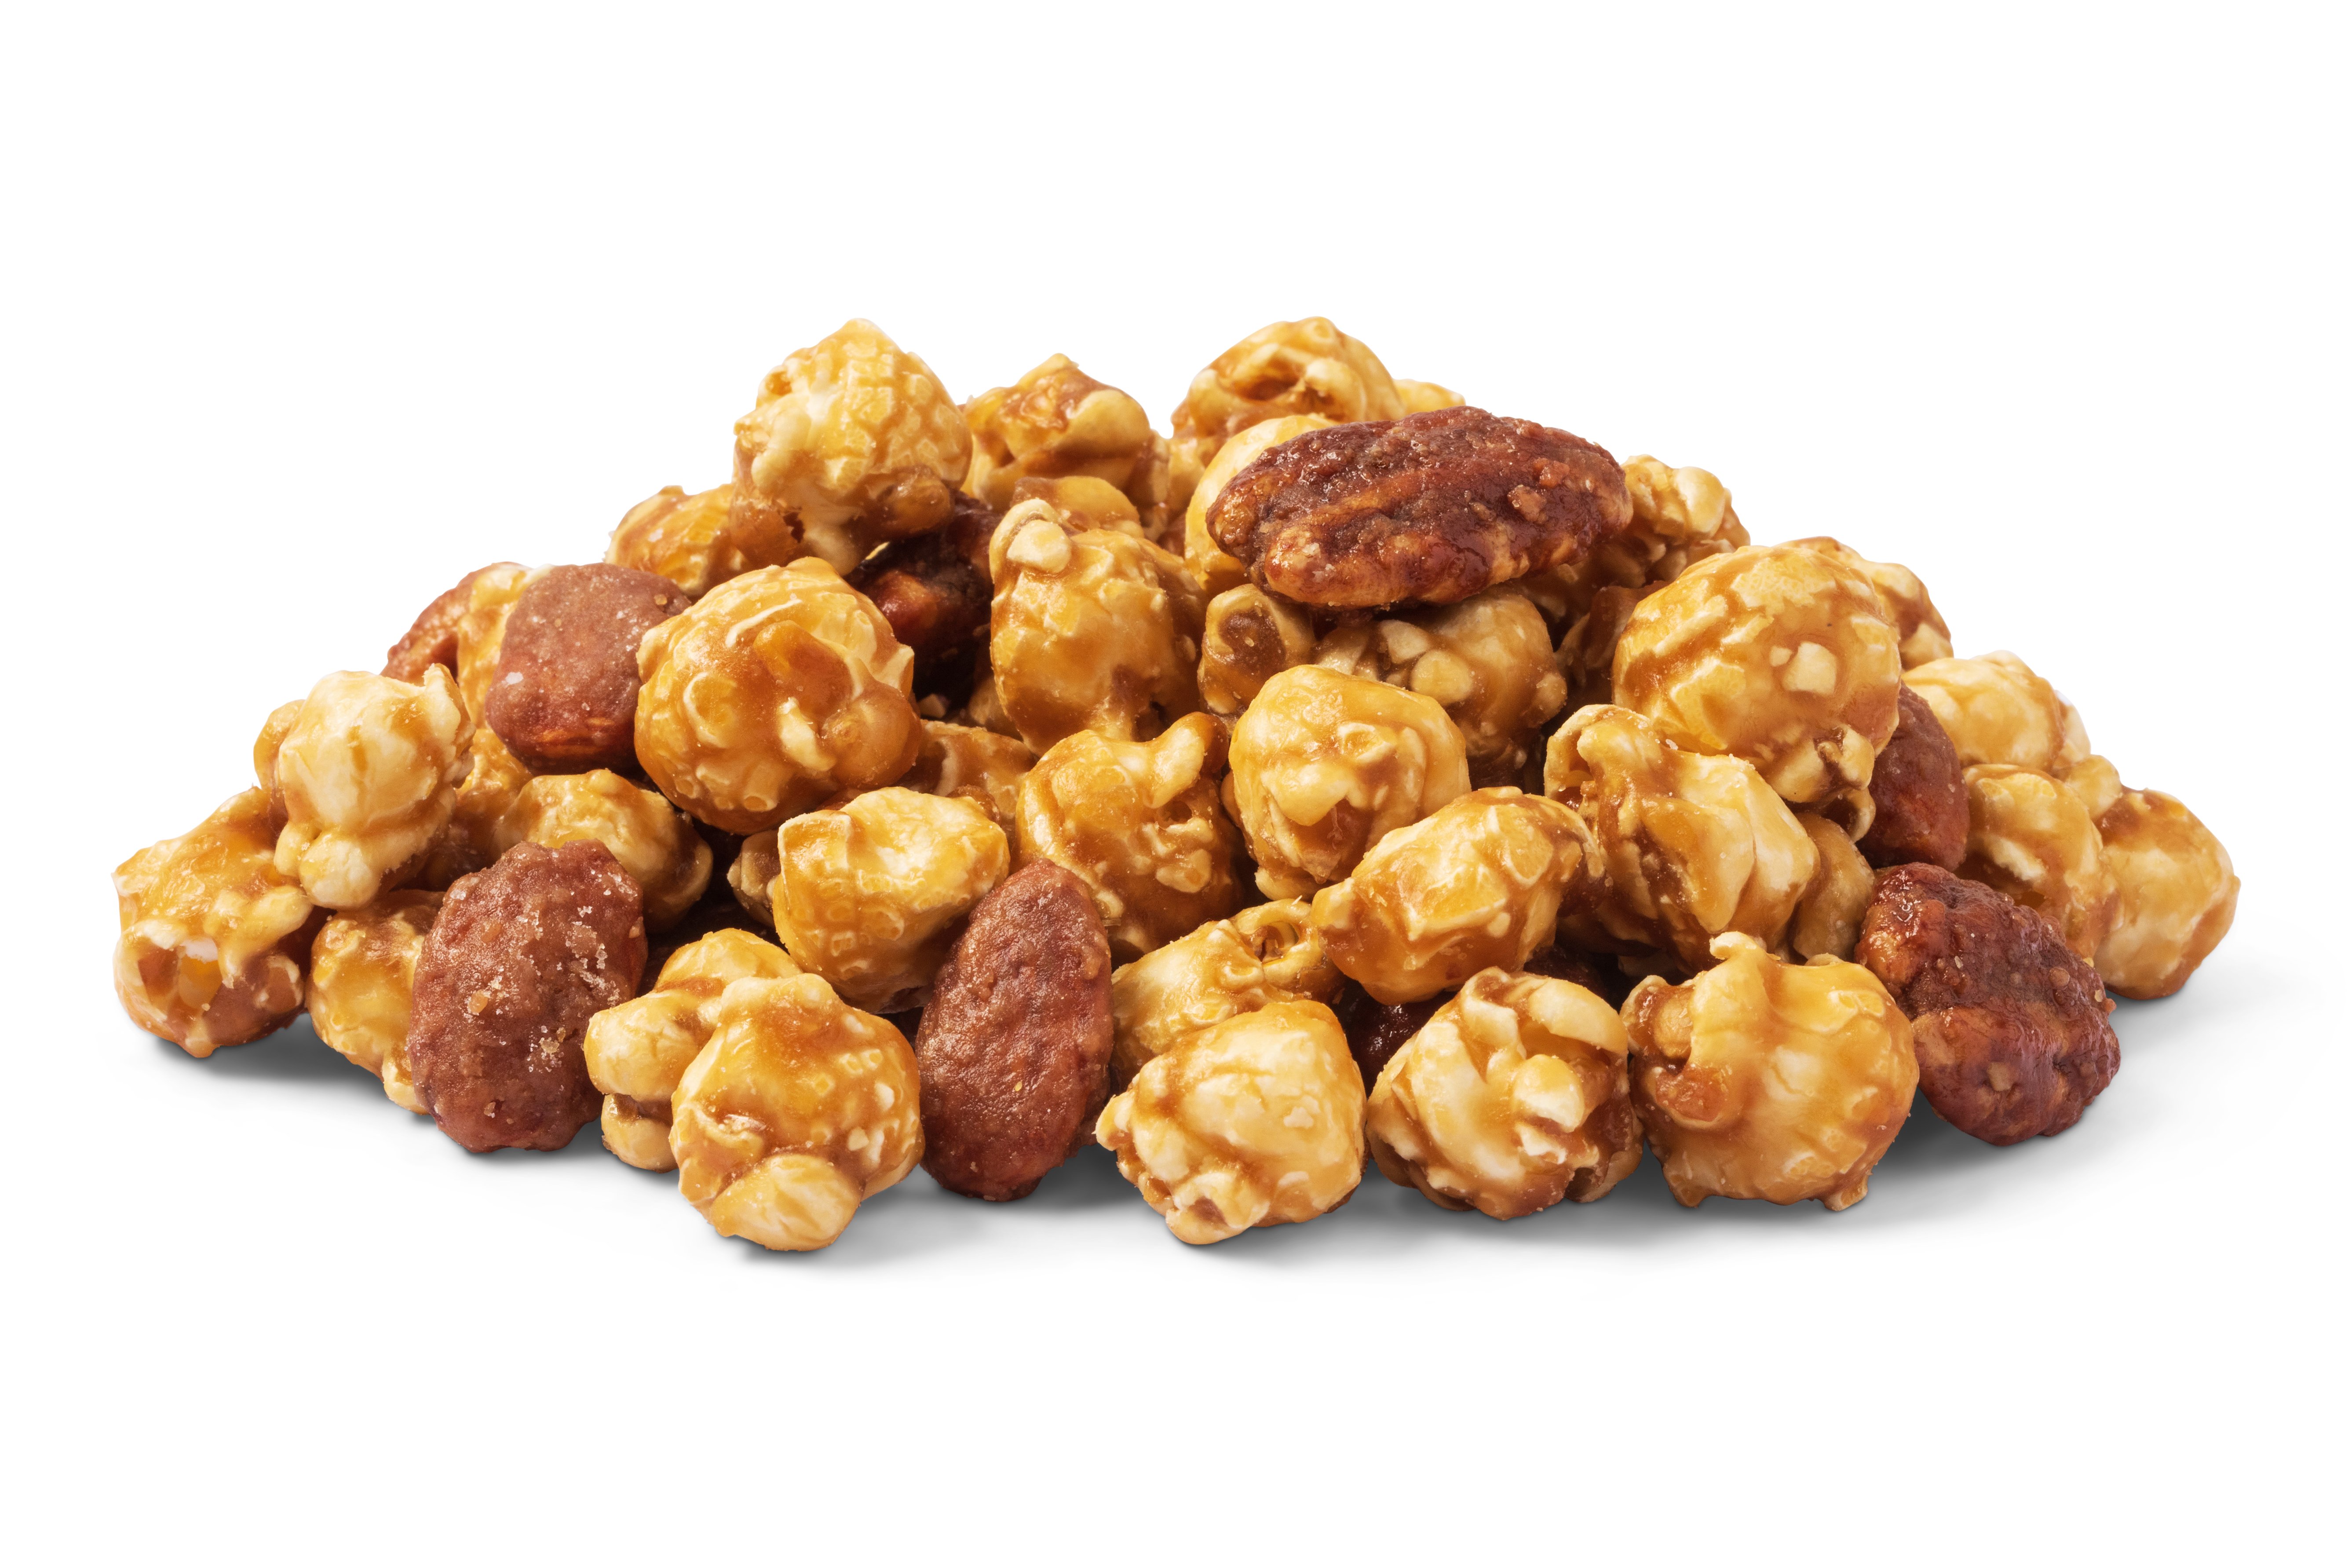 Great Northern Popcorn - The Perfect Snack for Any Occasion!